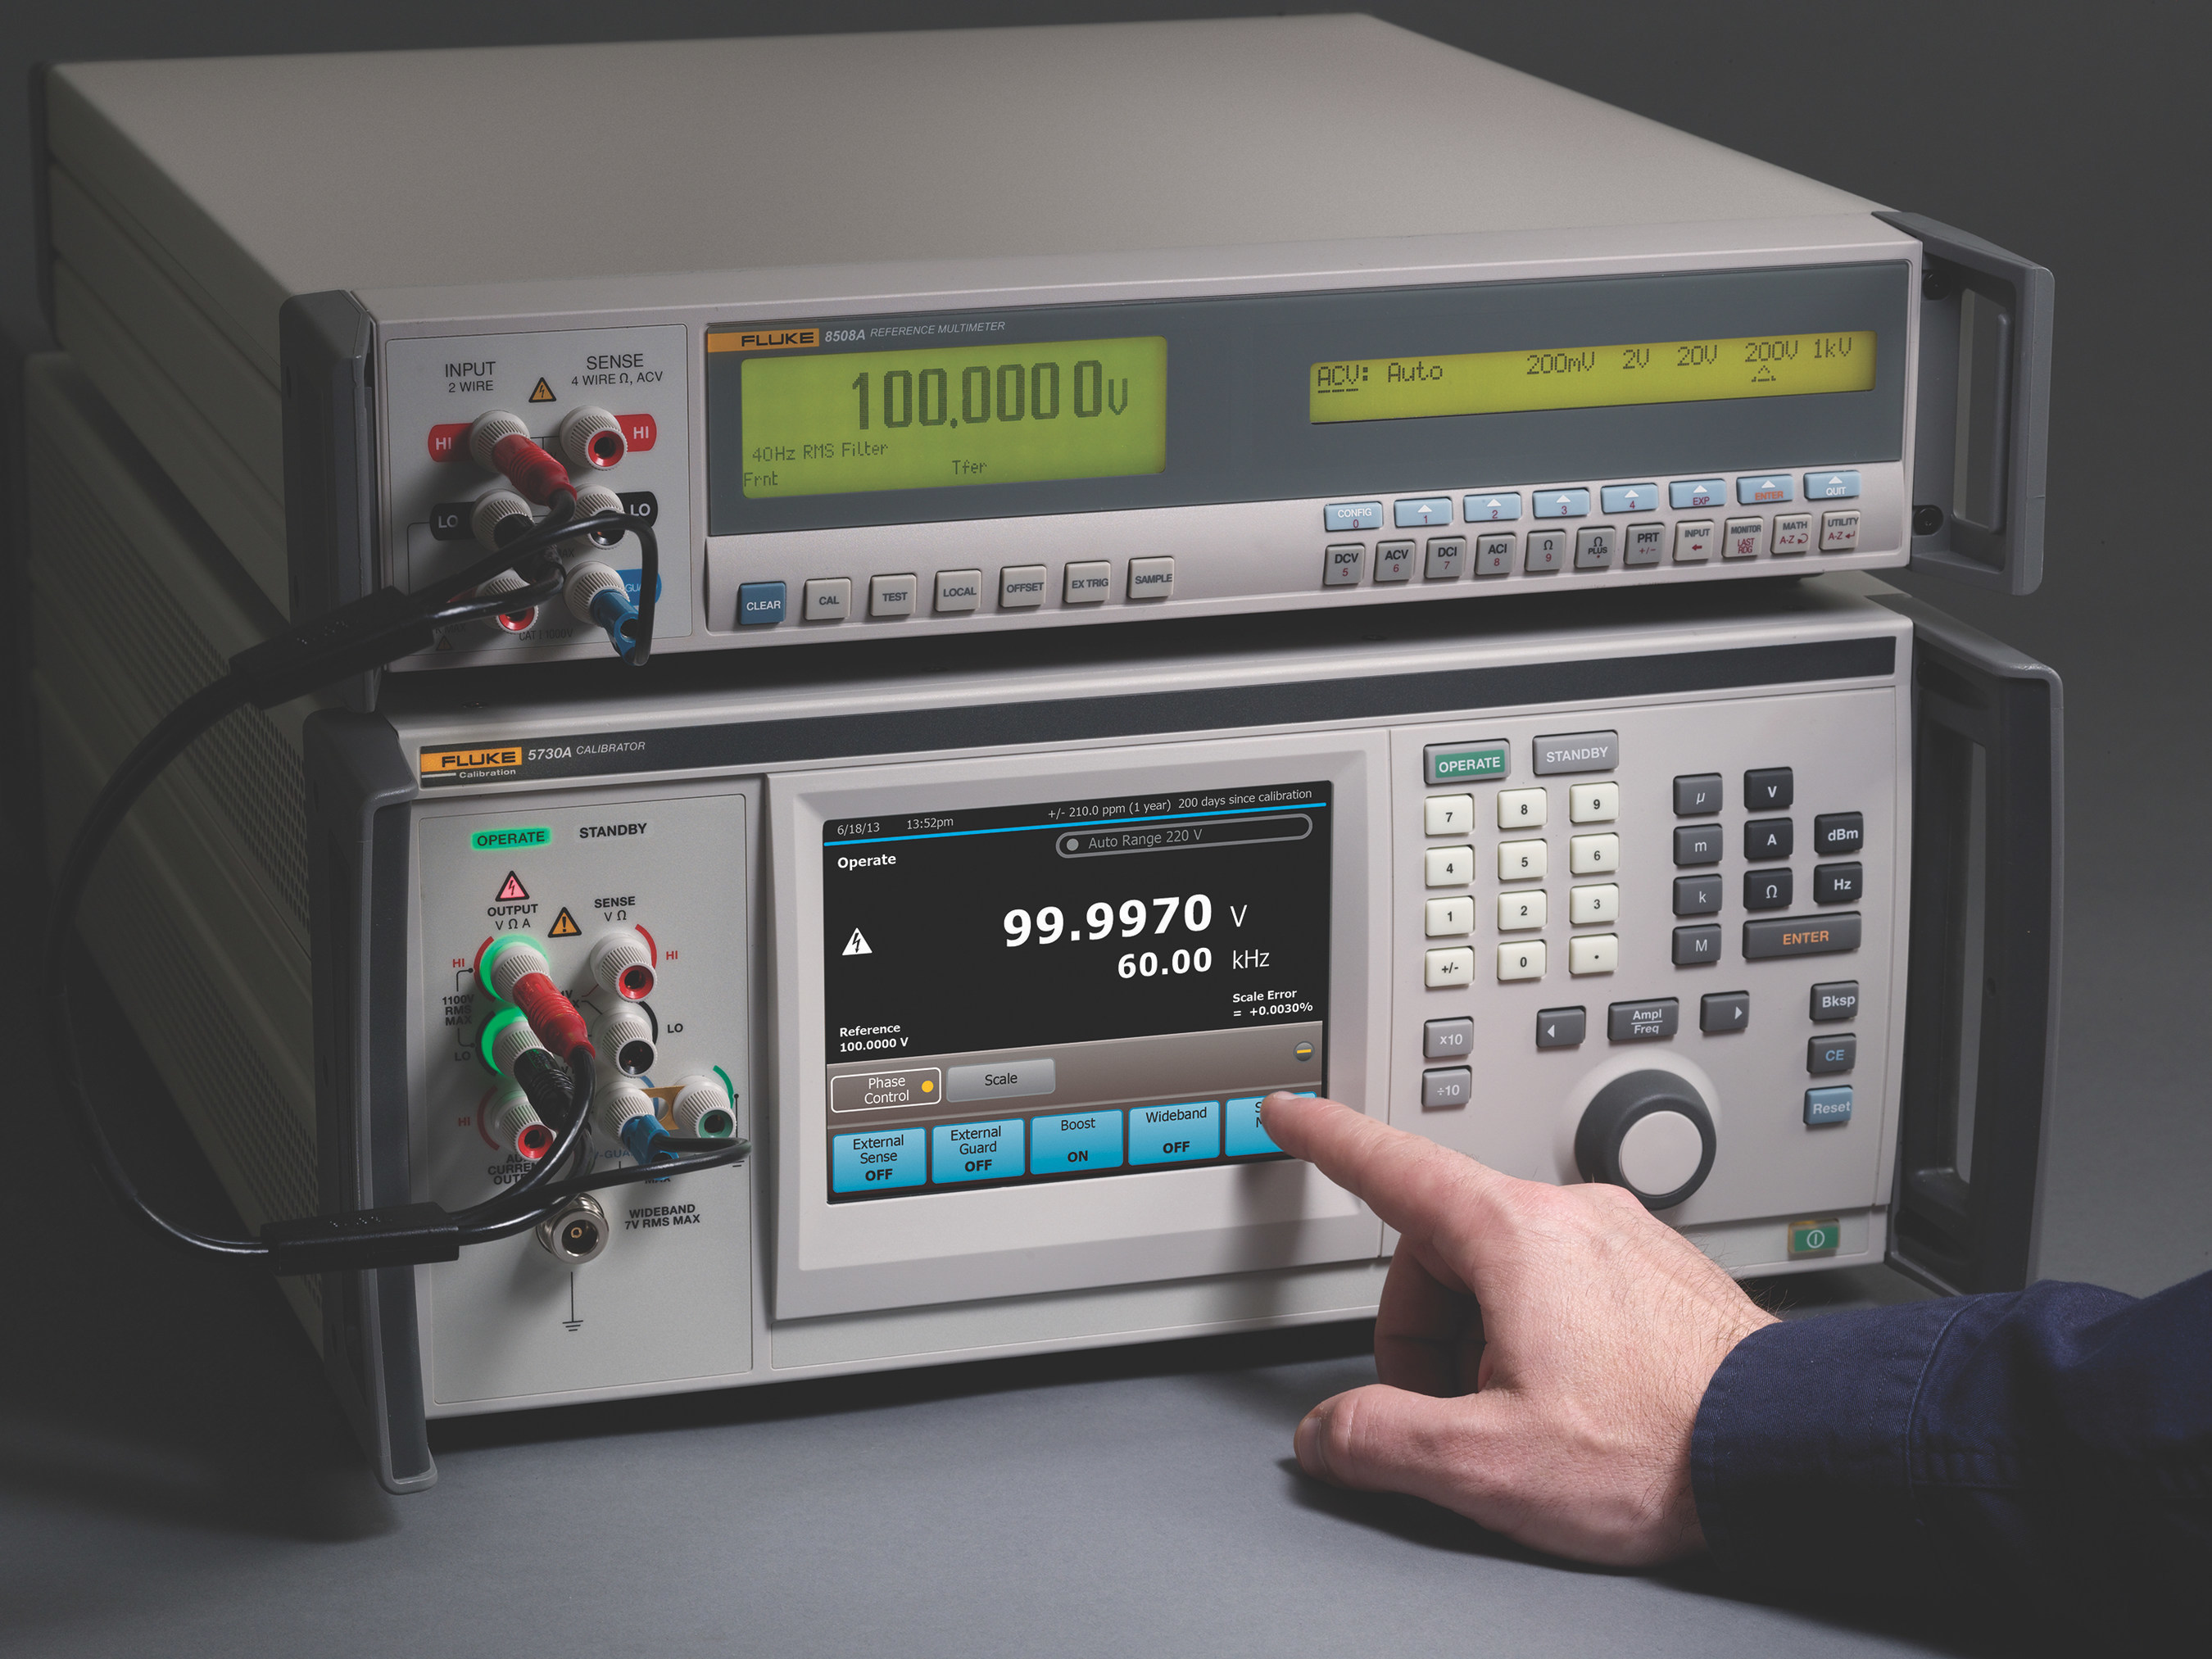 The new 50 MHz option also allows laboratories to expand their wideband capabilities to allow for calibration of devices such as 50 MHz RF voltmeters. It features improved specifications that will helps increase test uncertainty ratios (TURs) and increase test confidence while reducing the need to guardband.